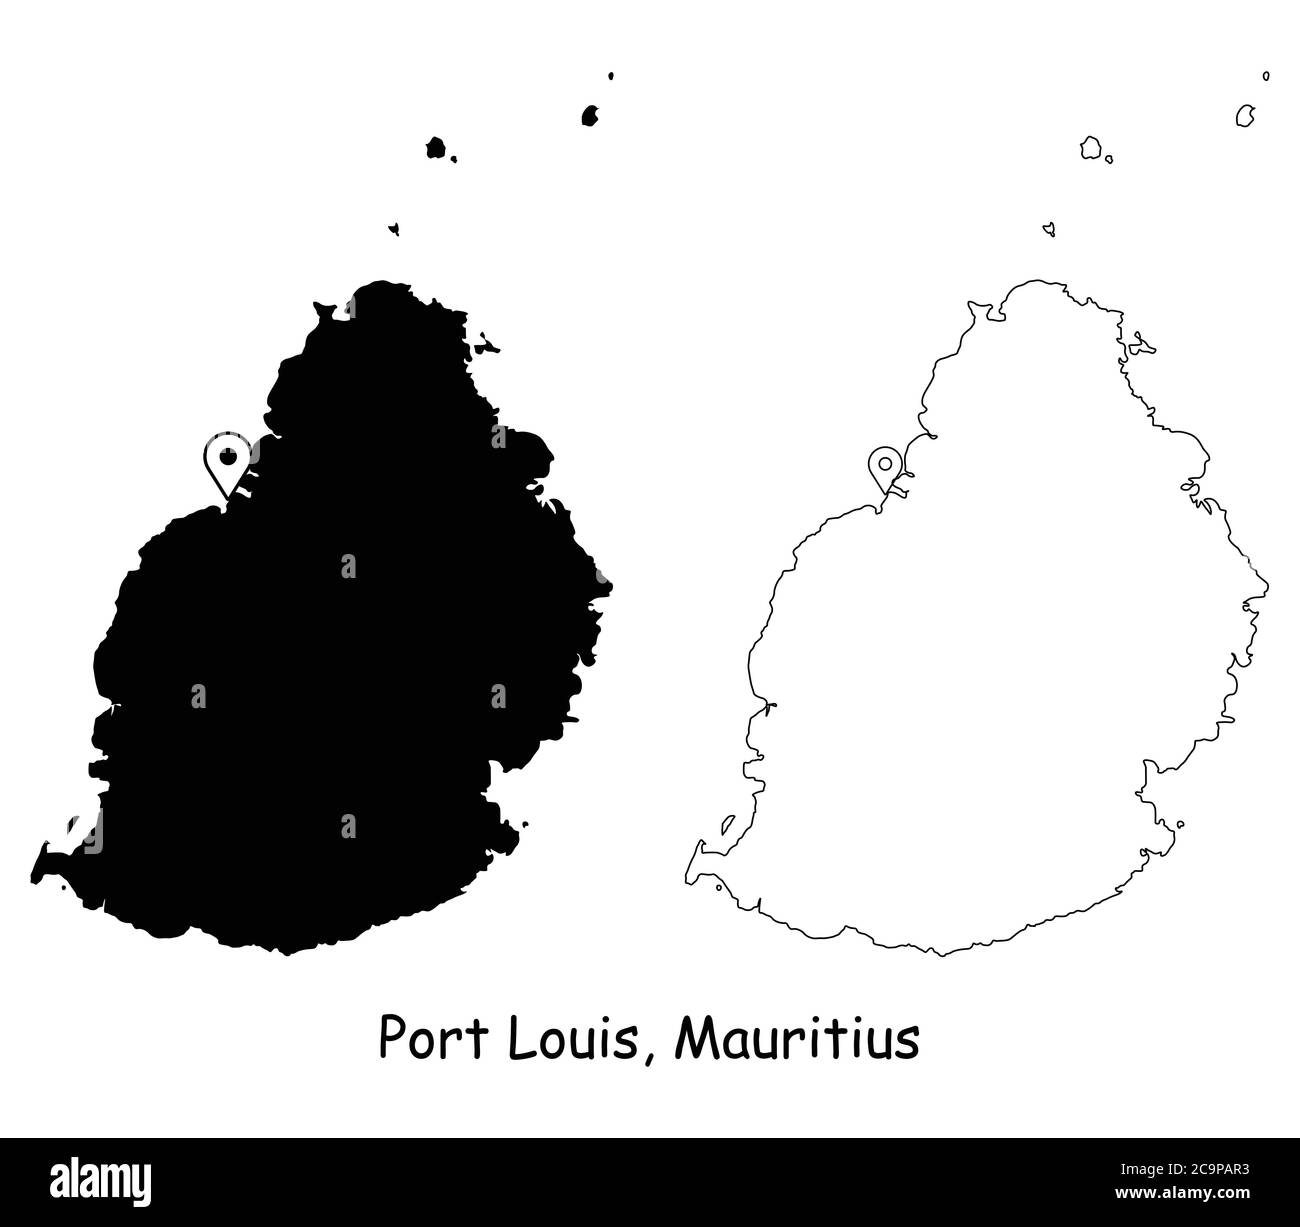 Port Louis Mauritius. Detailed Country Map with Location Pin on Capital City. Black silhouette and outline maps isolated on white background. EPS Vect Stock Vector